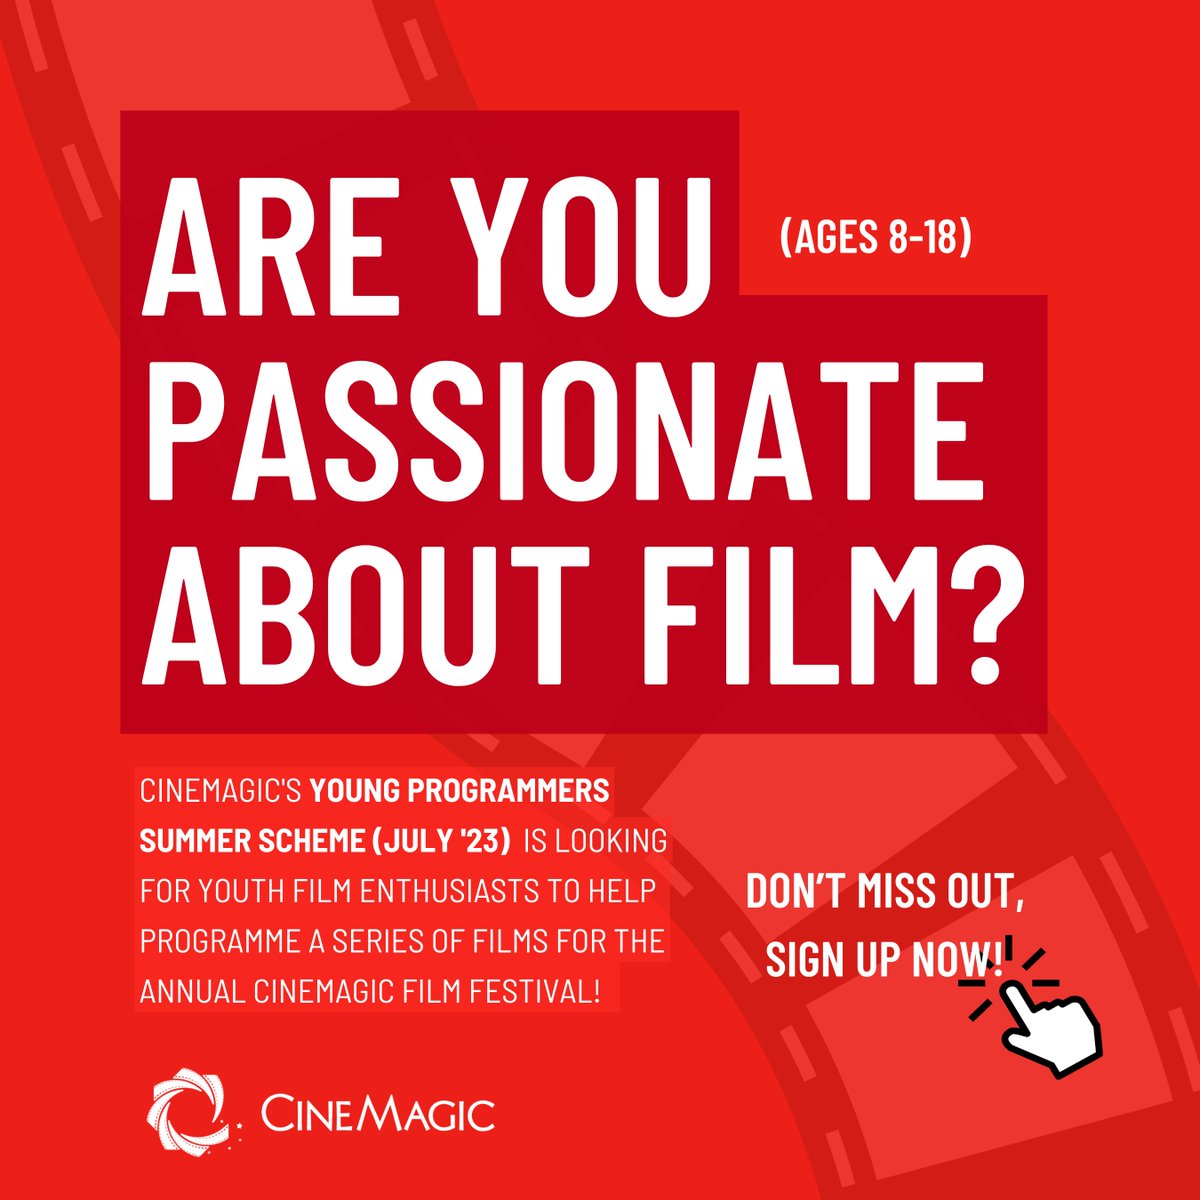 Are you passionate about film? Cinemagic’s ‘Young Programmers Summer Scheme’ is looking for YOUth film enthusiasts to help programme a series of films for the annual Cinemagic Film Festival! (£10/person)

VISIT: tinyurl.com/2p97wcka

#Cinemagic #SummerTime #YoungConsultants